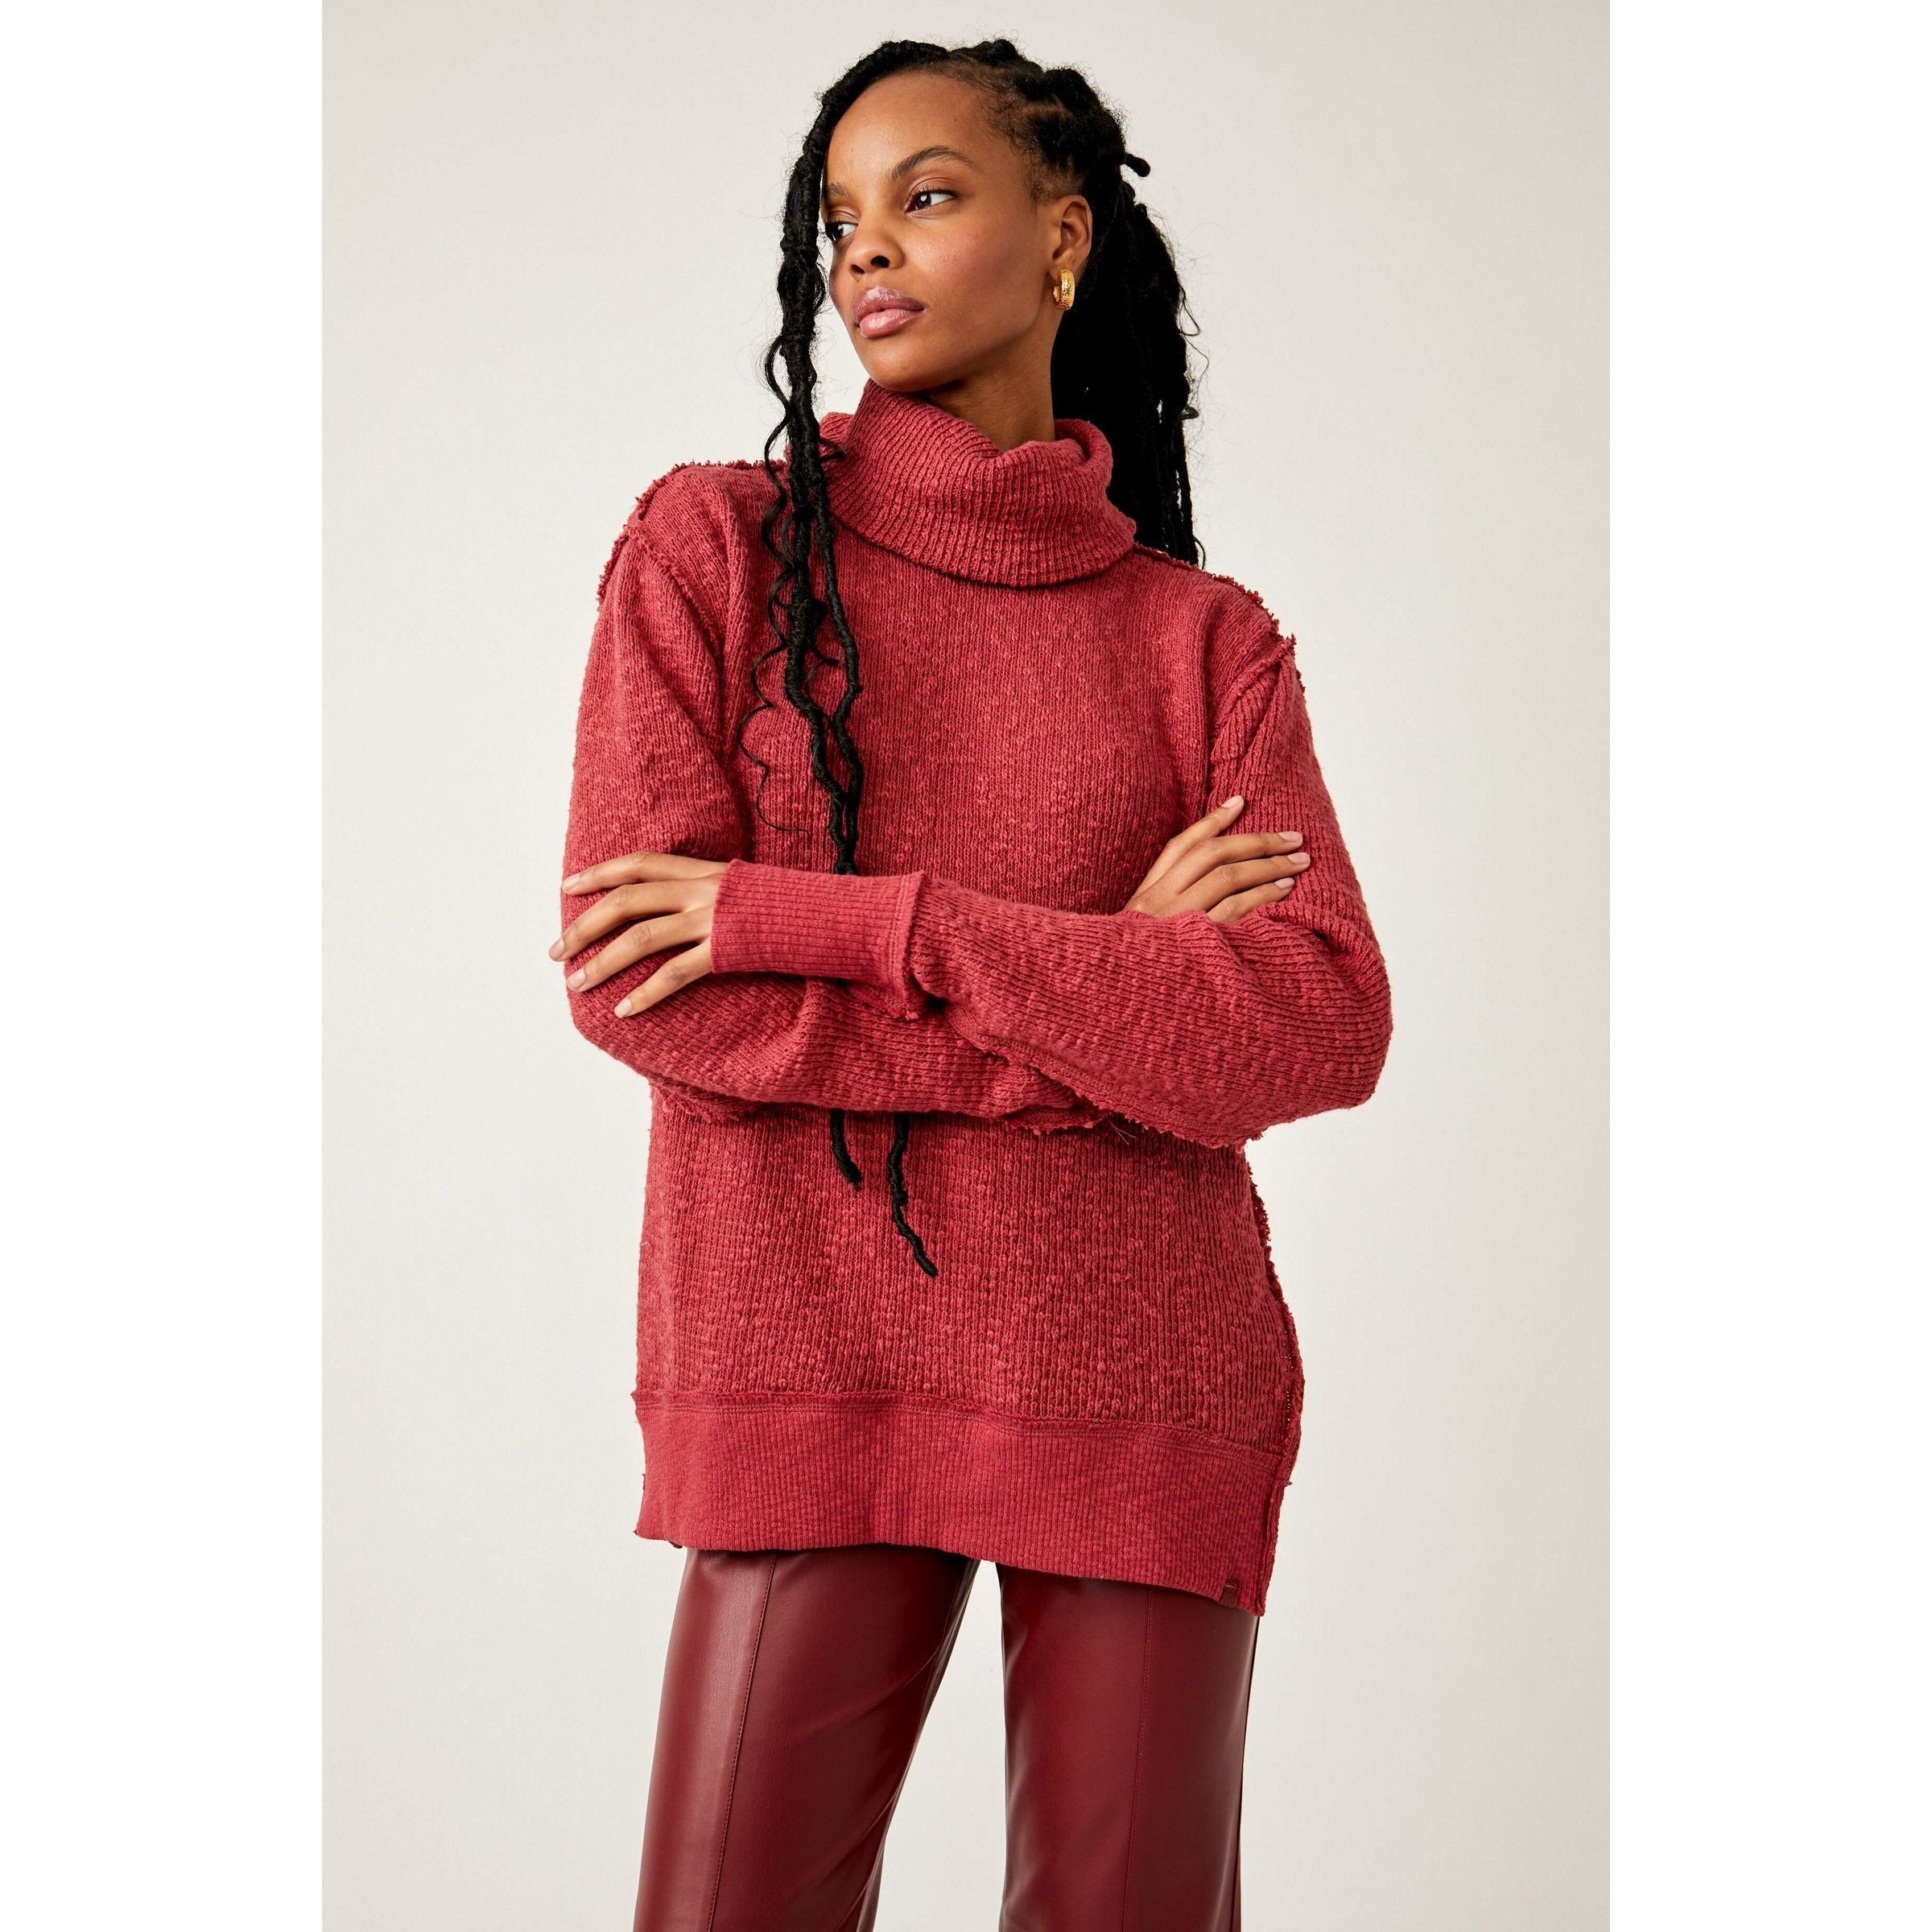 Free People - Tommy Turtleneck in Blended Berry-SQ4816755